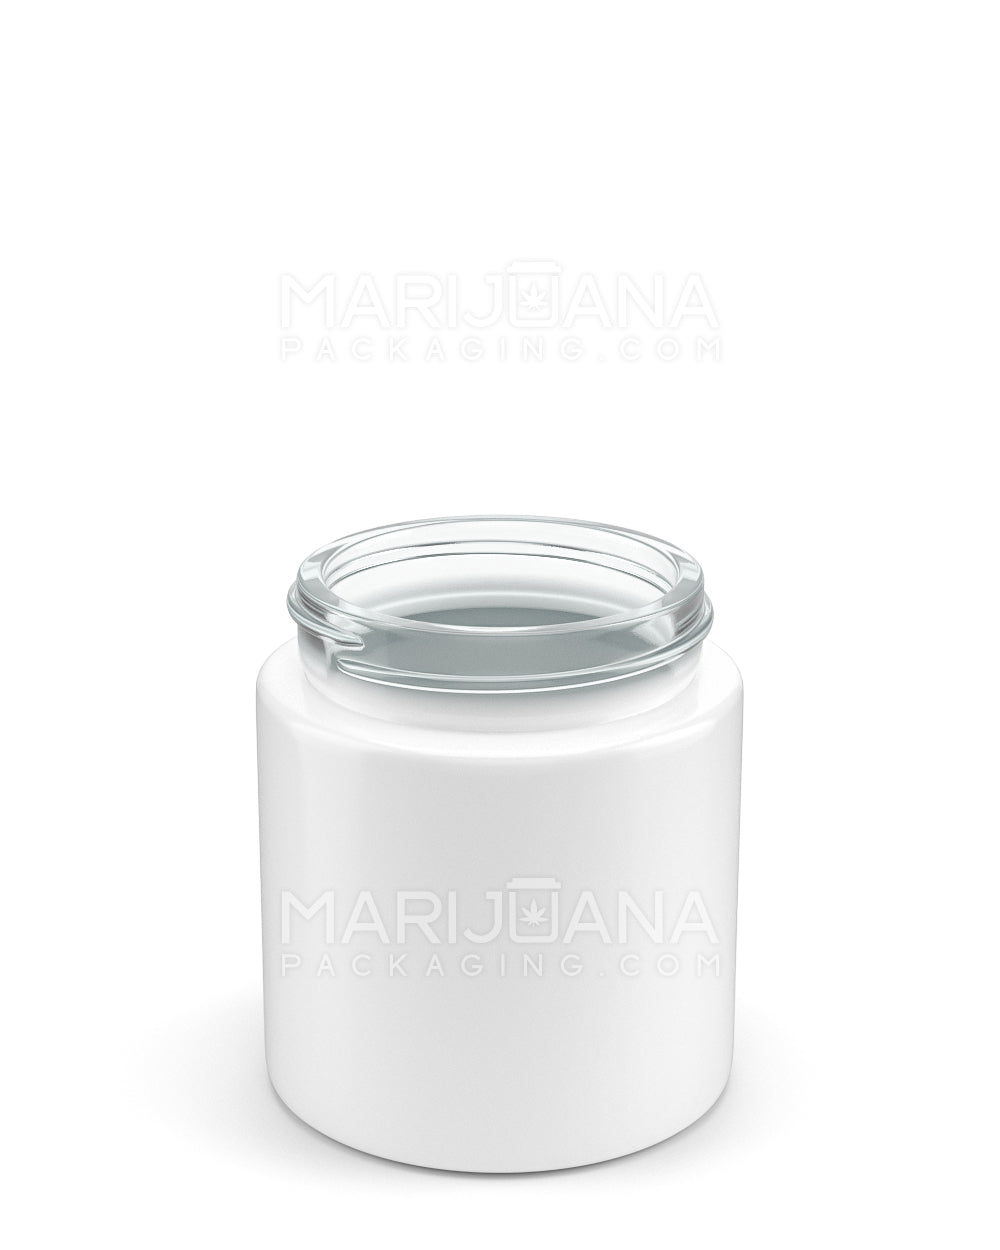 Straight Sided Glossy White Glass Jars | 50mm - 3oz - 100 Count - 2